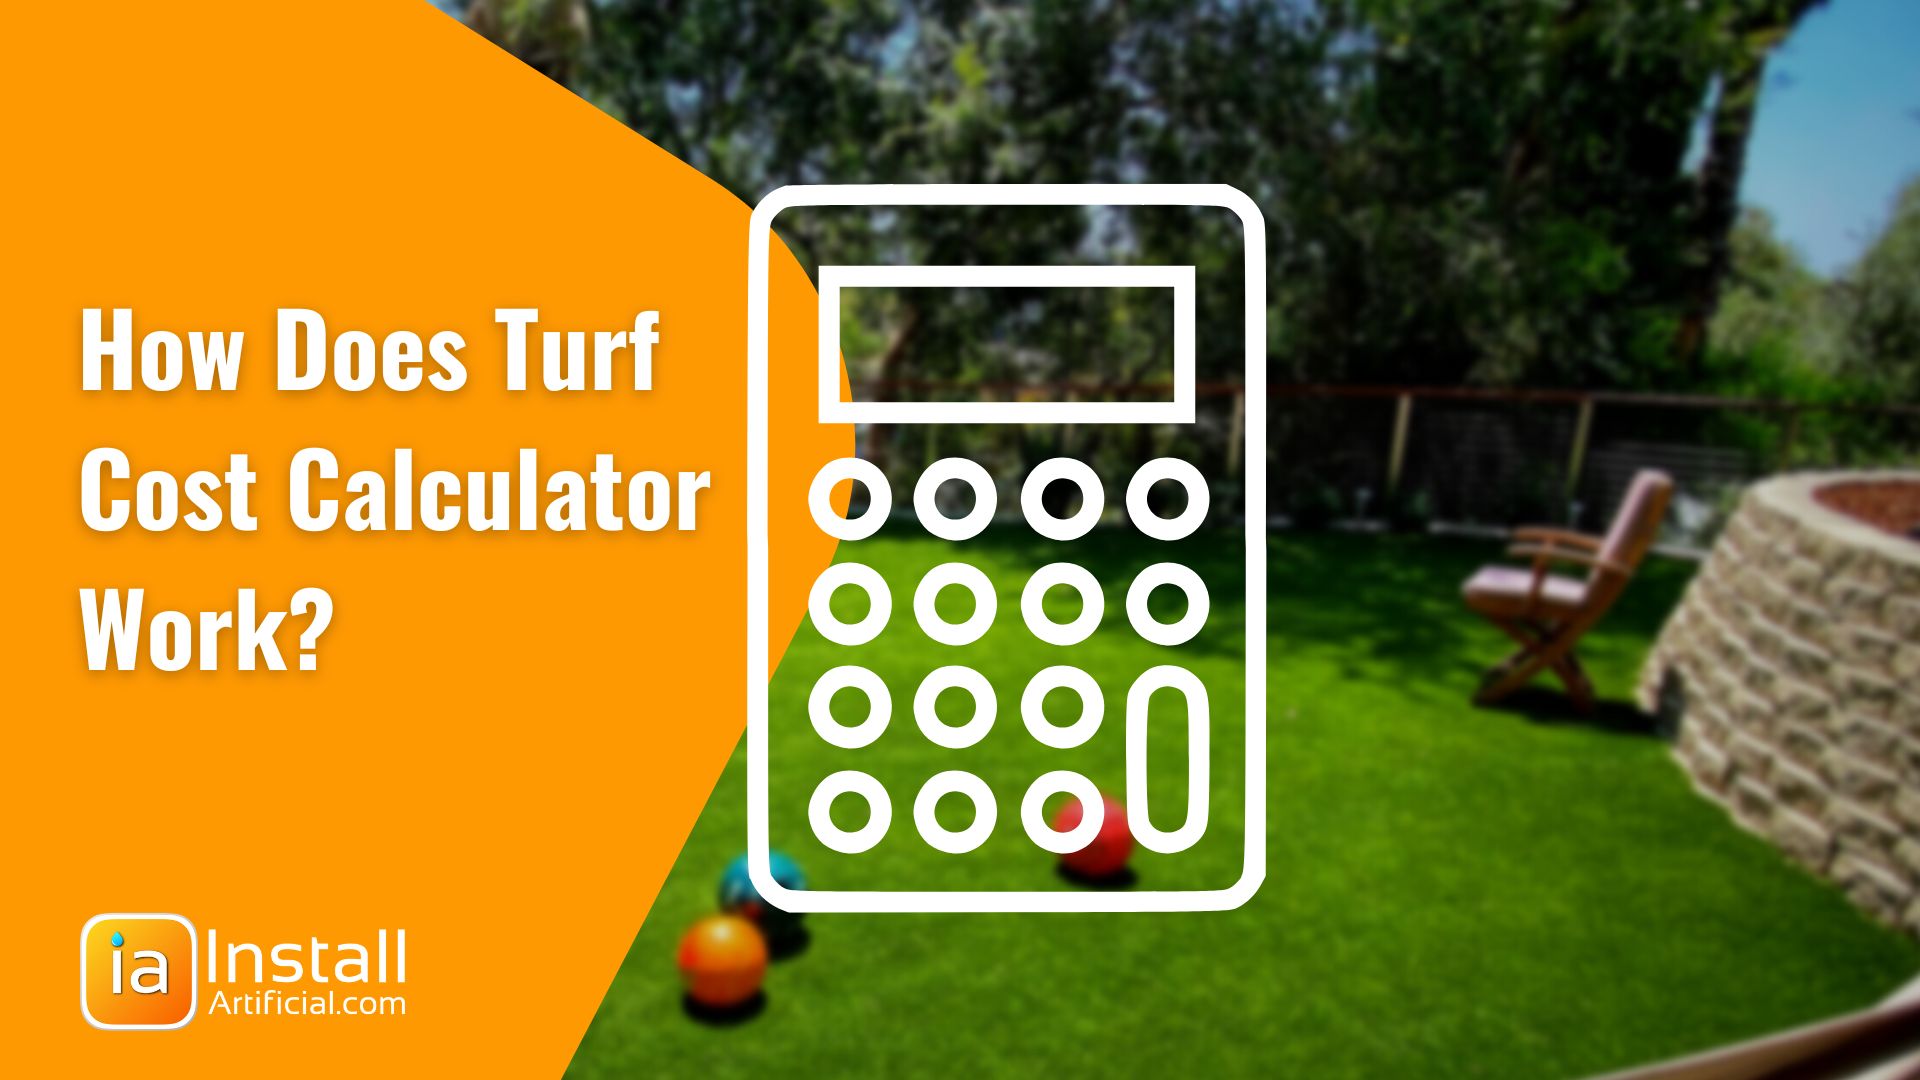 How Does an Online Artificial Turf Cost Calculator Work?